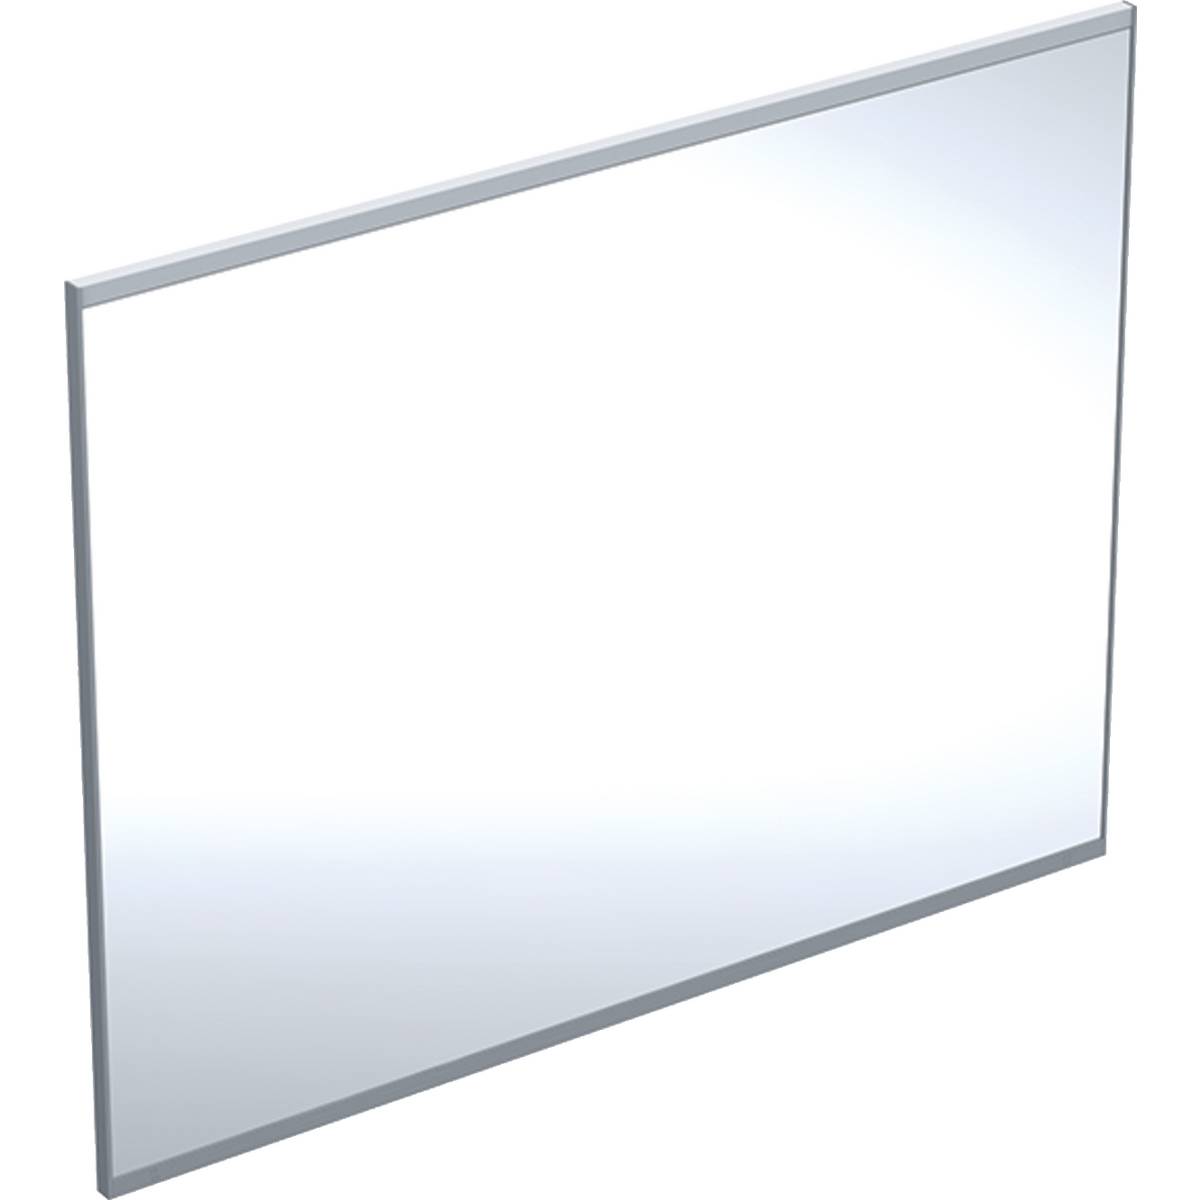 Option Plus illuminated mirror with direct and indirect lighting